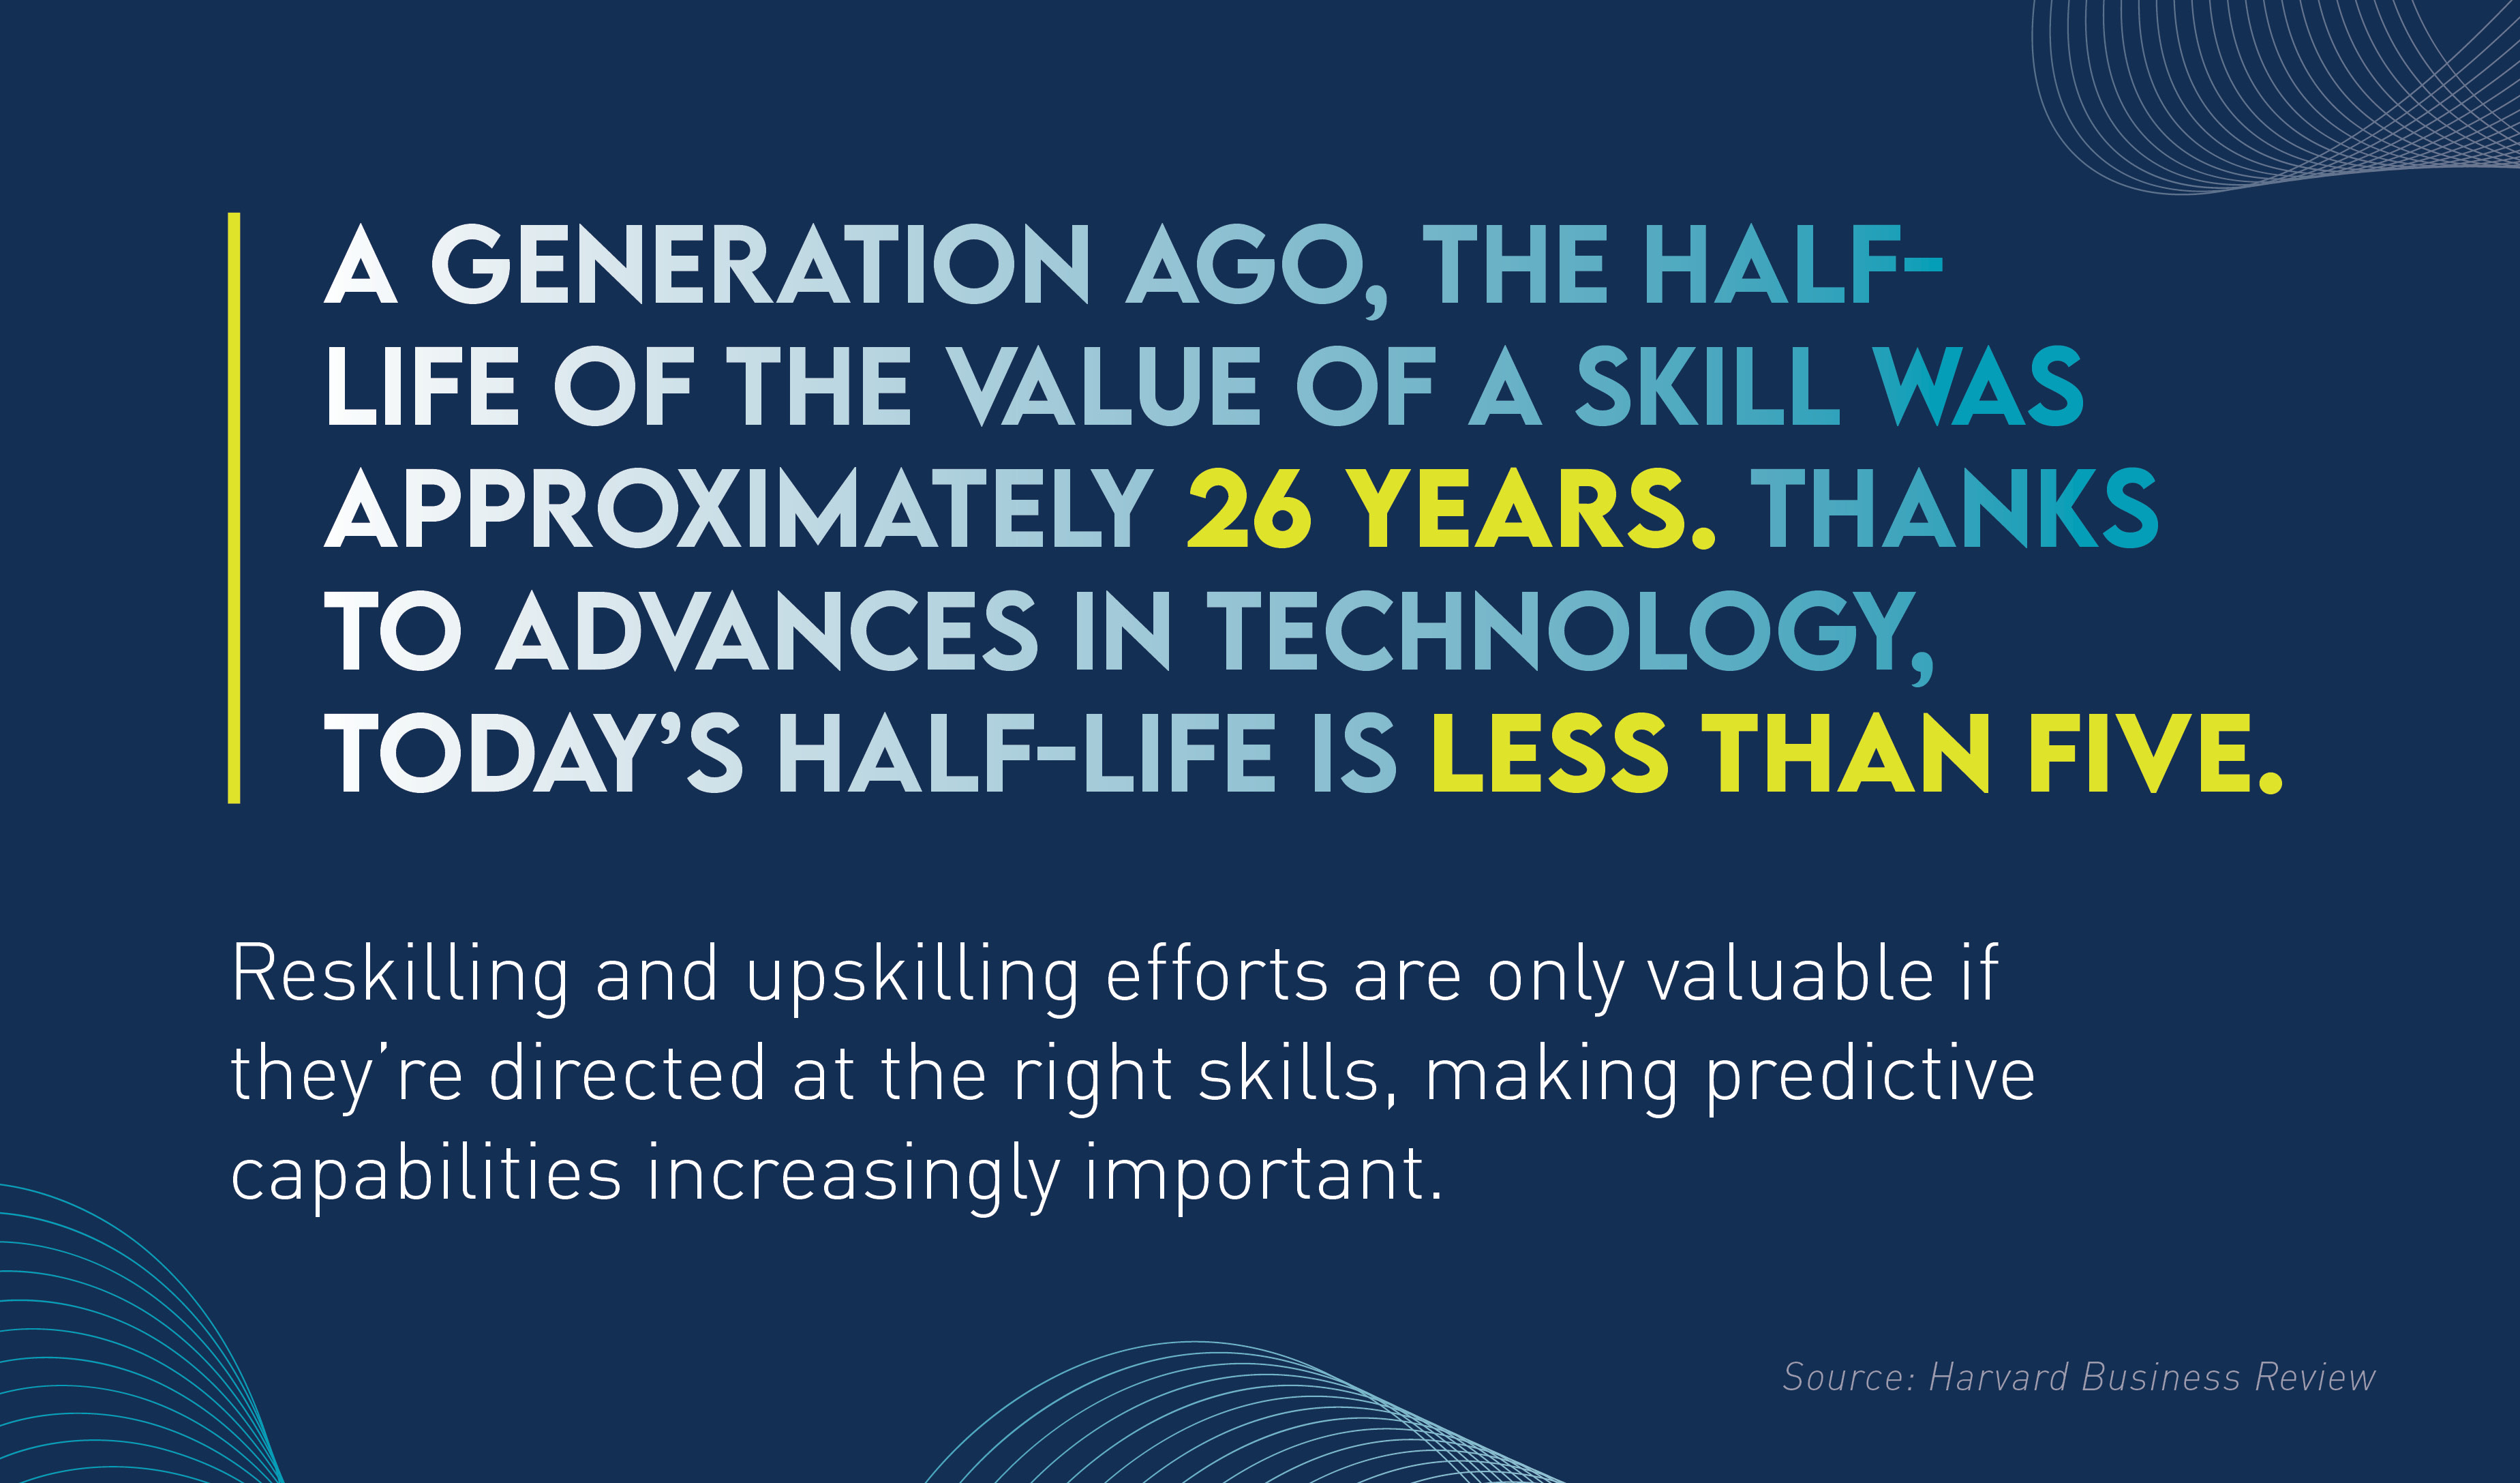 Graphic with the following copy: "A generation ago, the half-life of the value of a skill was approximately 26 years. Thanks to advances in technology, today's half-life is less than five. Reskilling and upskilling efforts are only valuable if they're directed at the right skills, making predictive capabilities increasingly important."